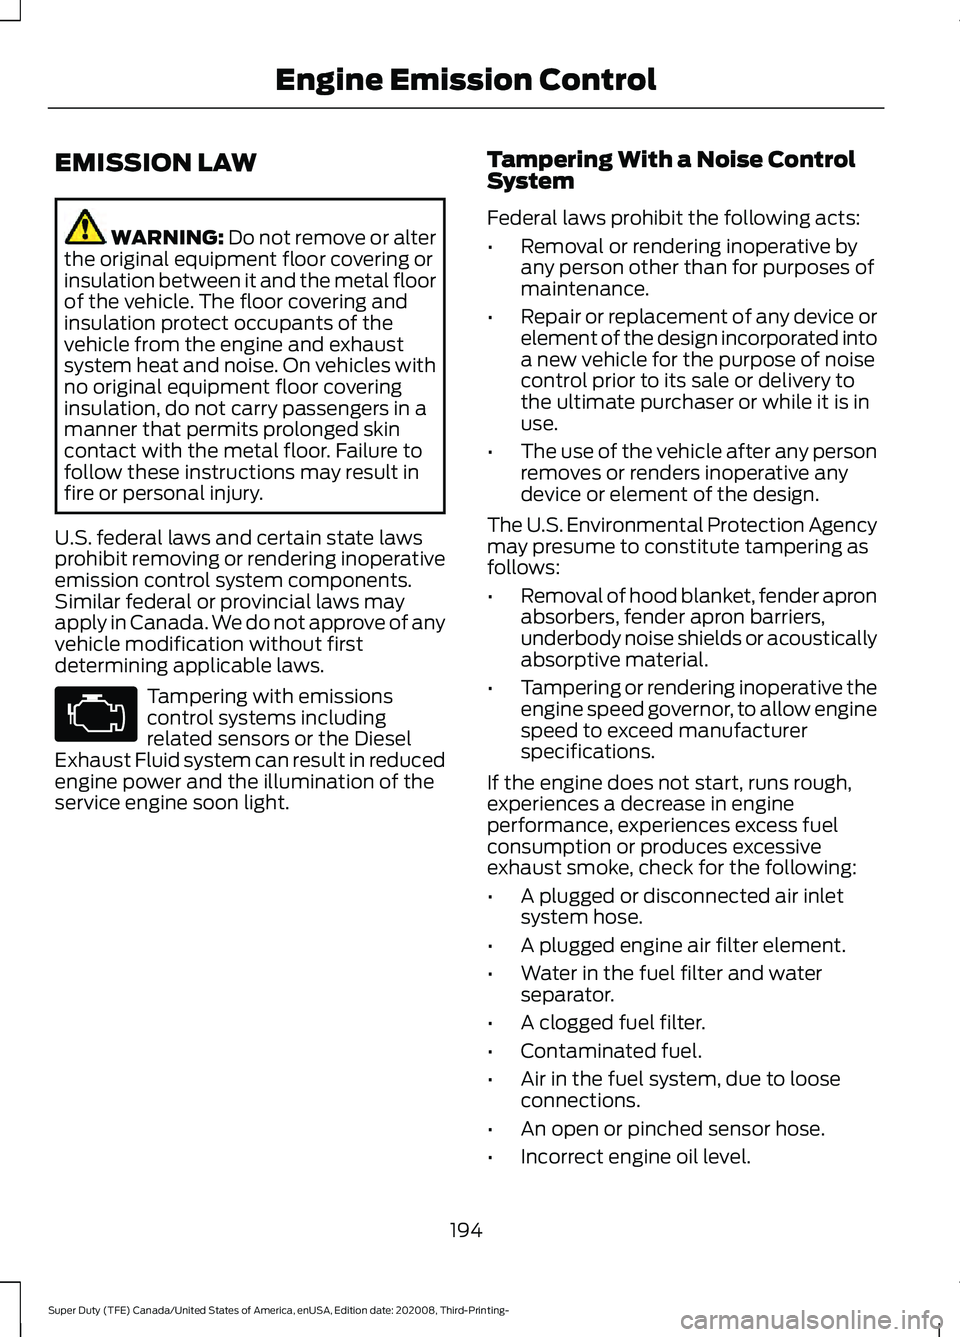 FORD F-550 2021  Owners Manual EMISSION LAW
WARNING: Do not remove or alter
the original equipment floor covering or
insulation between it and the metal floor
of the vehicle. The floor covering and
insulation protect occupants of t